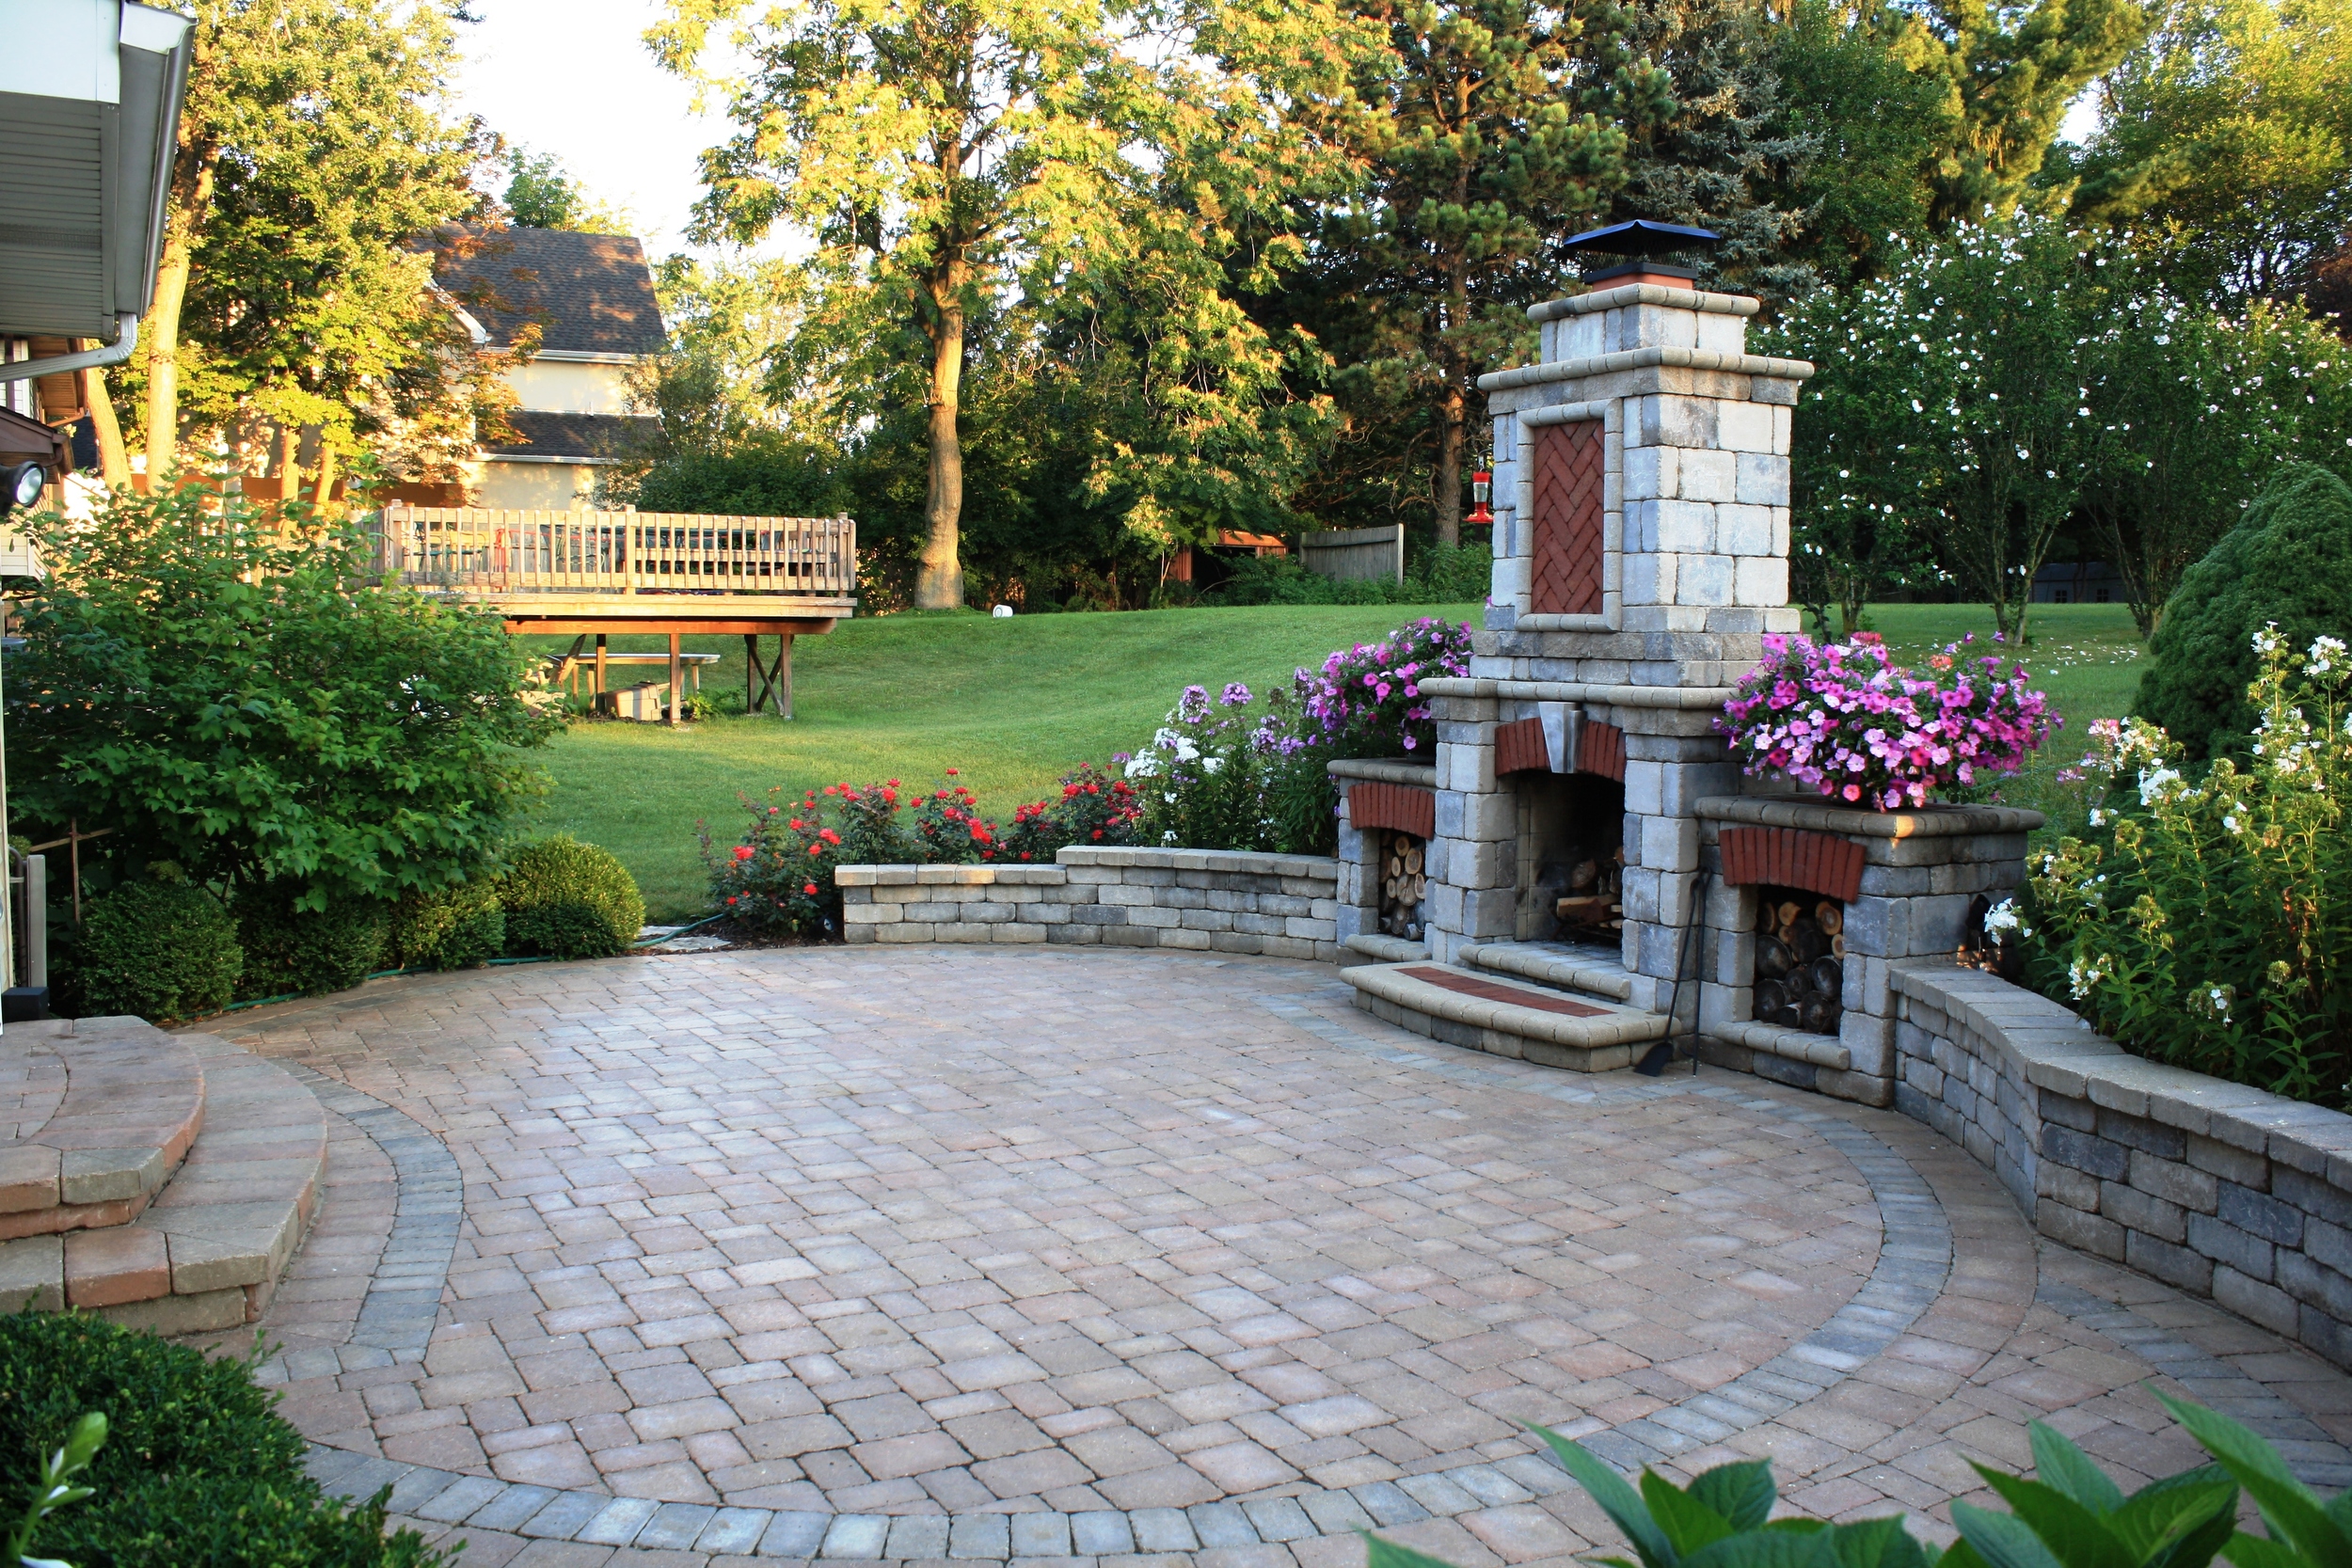  Built a beautiful outdoor fireplace, retaining wall and patio.&nbsp; Clarendon Hills, IL 